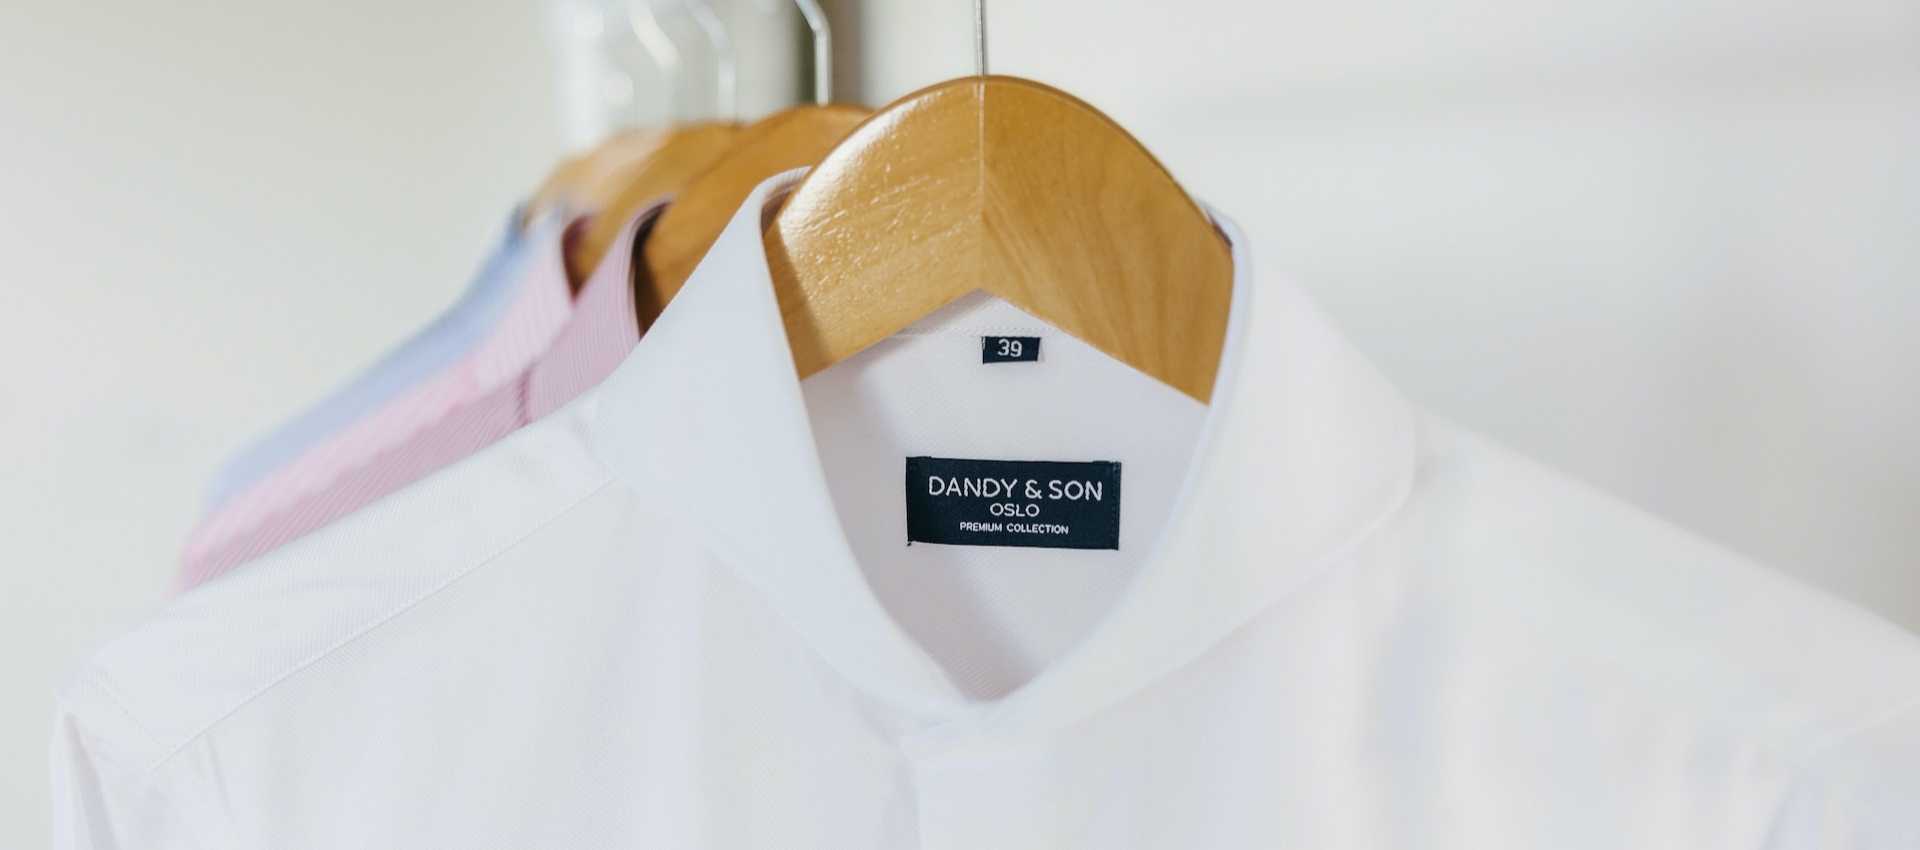 Discounted and Sale Shirts for Men from Dandy & Son. Image a White Extreme Cutaway Collar Shirts from Dandy & Son on a hanger.